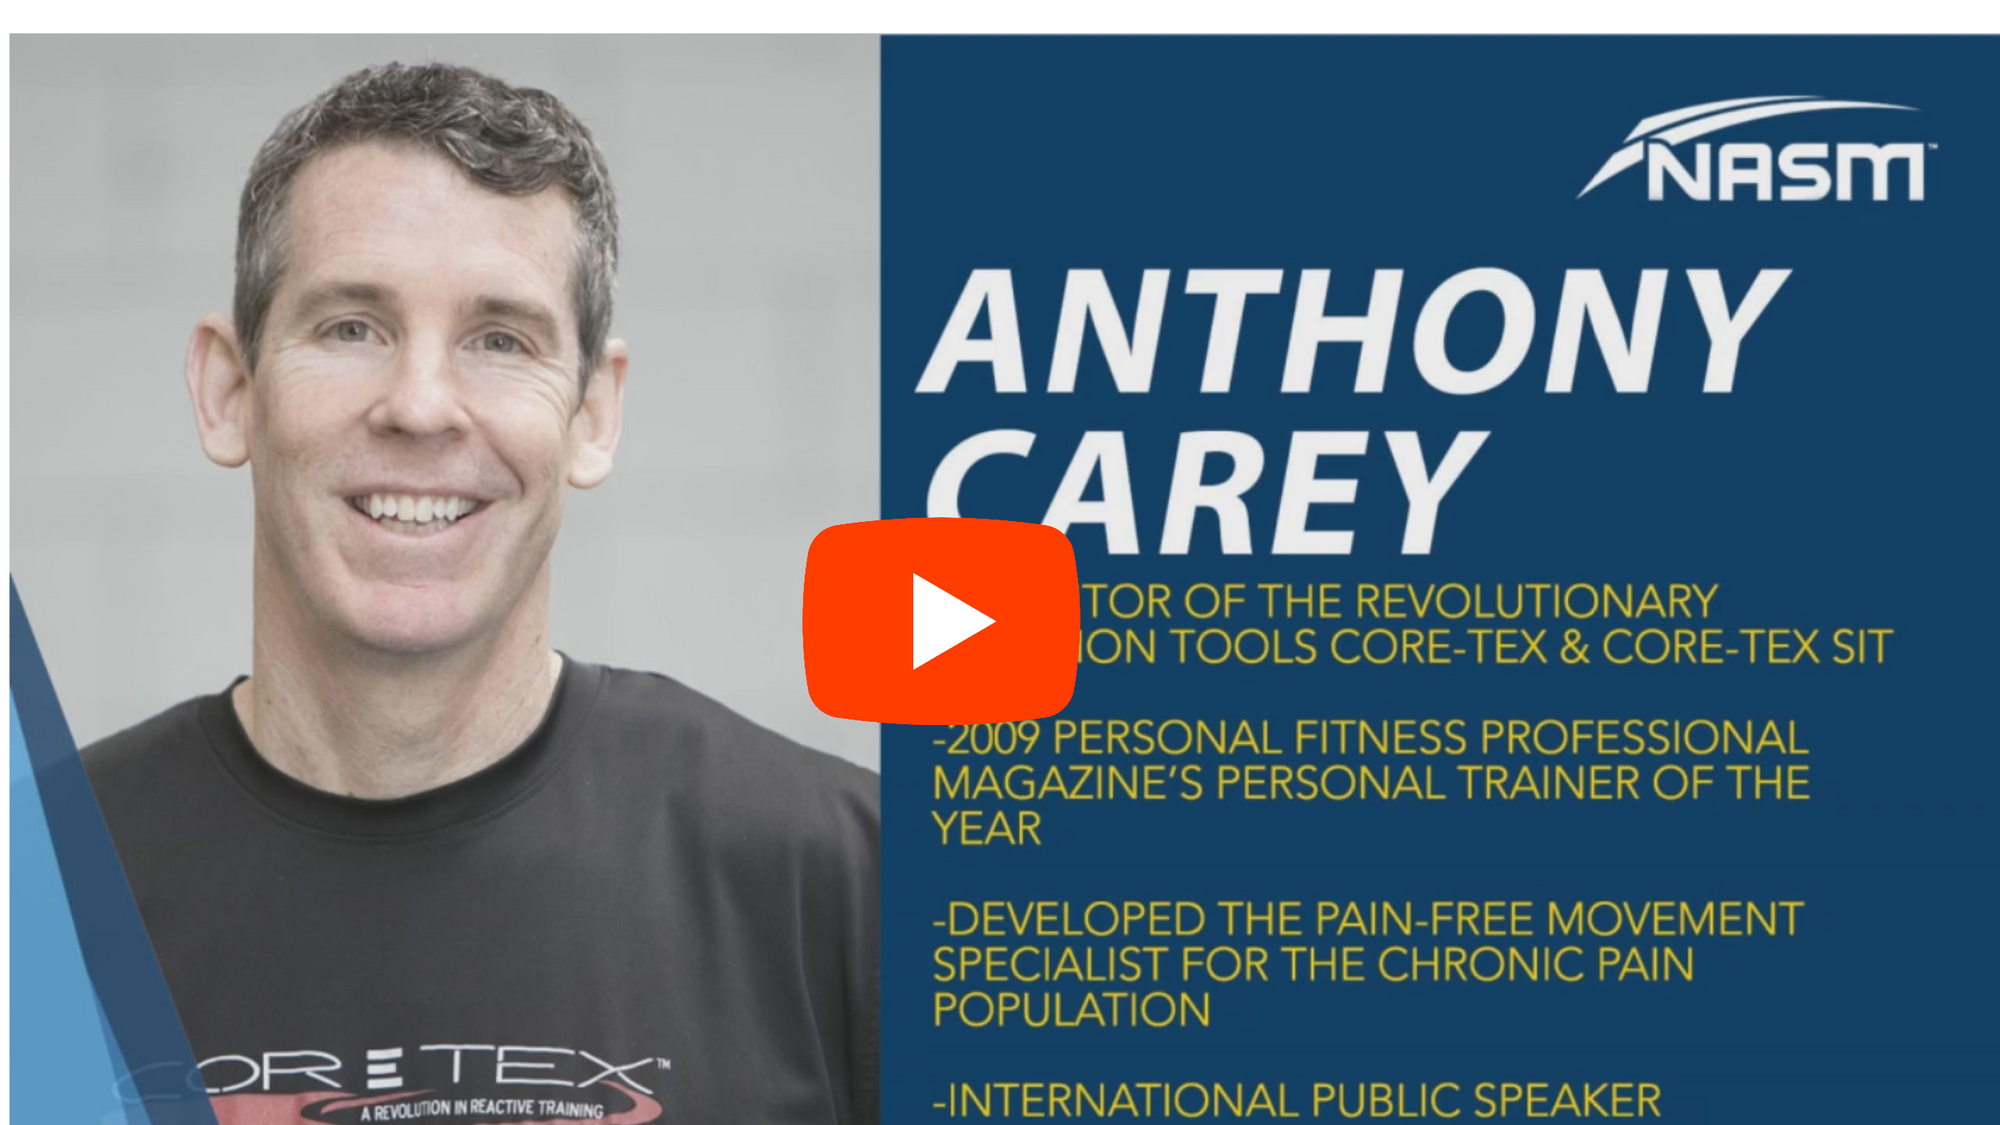 Core-Tex Inventor Interviewed on the NASM Random Fitness Podcast